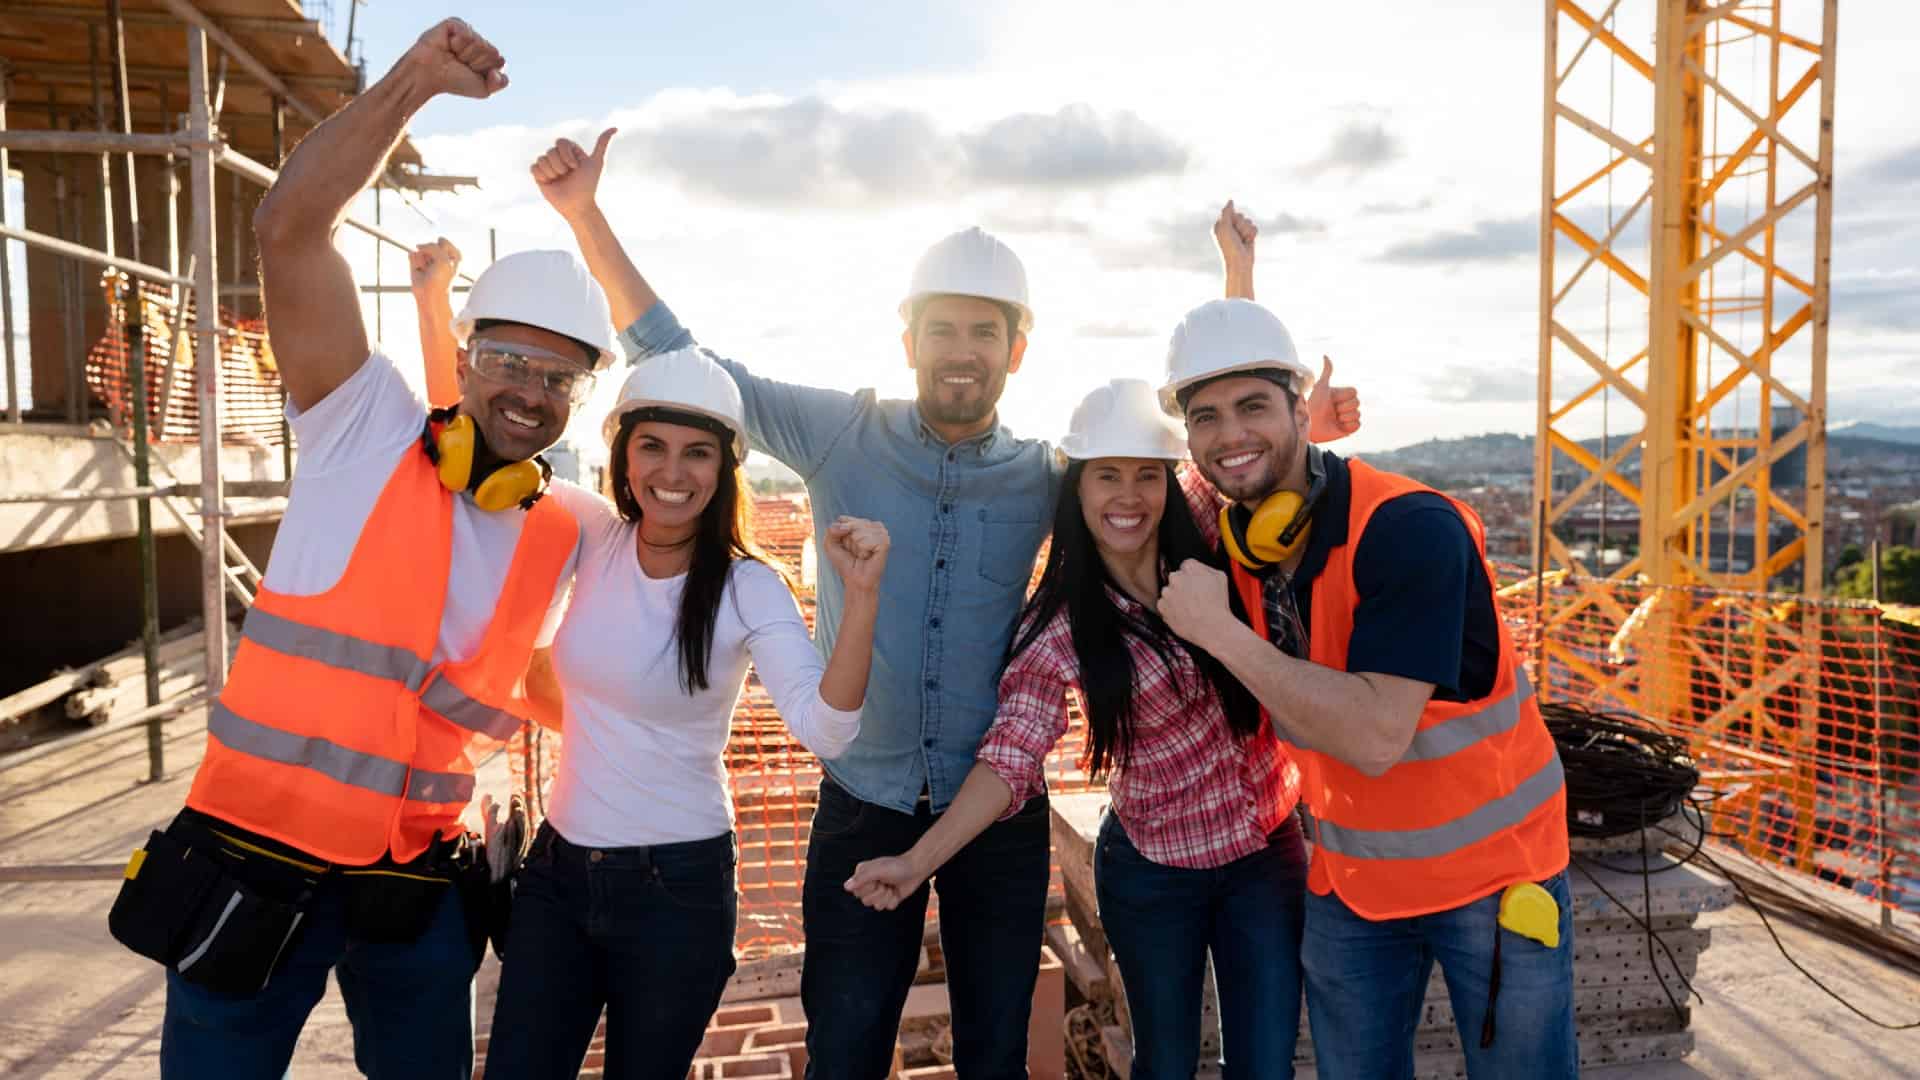 a group of five engineers wearing hard hats and some in high visibility vests raise their arms in happy celebration atop a building site with construction and equipment in the background.